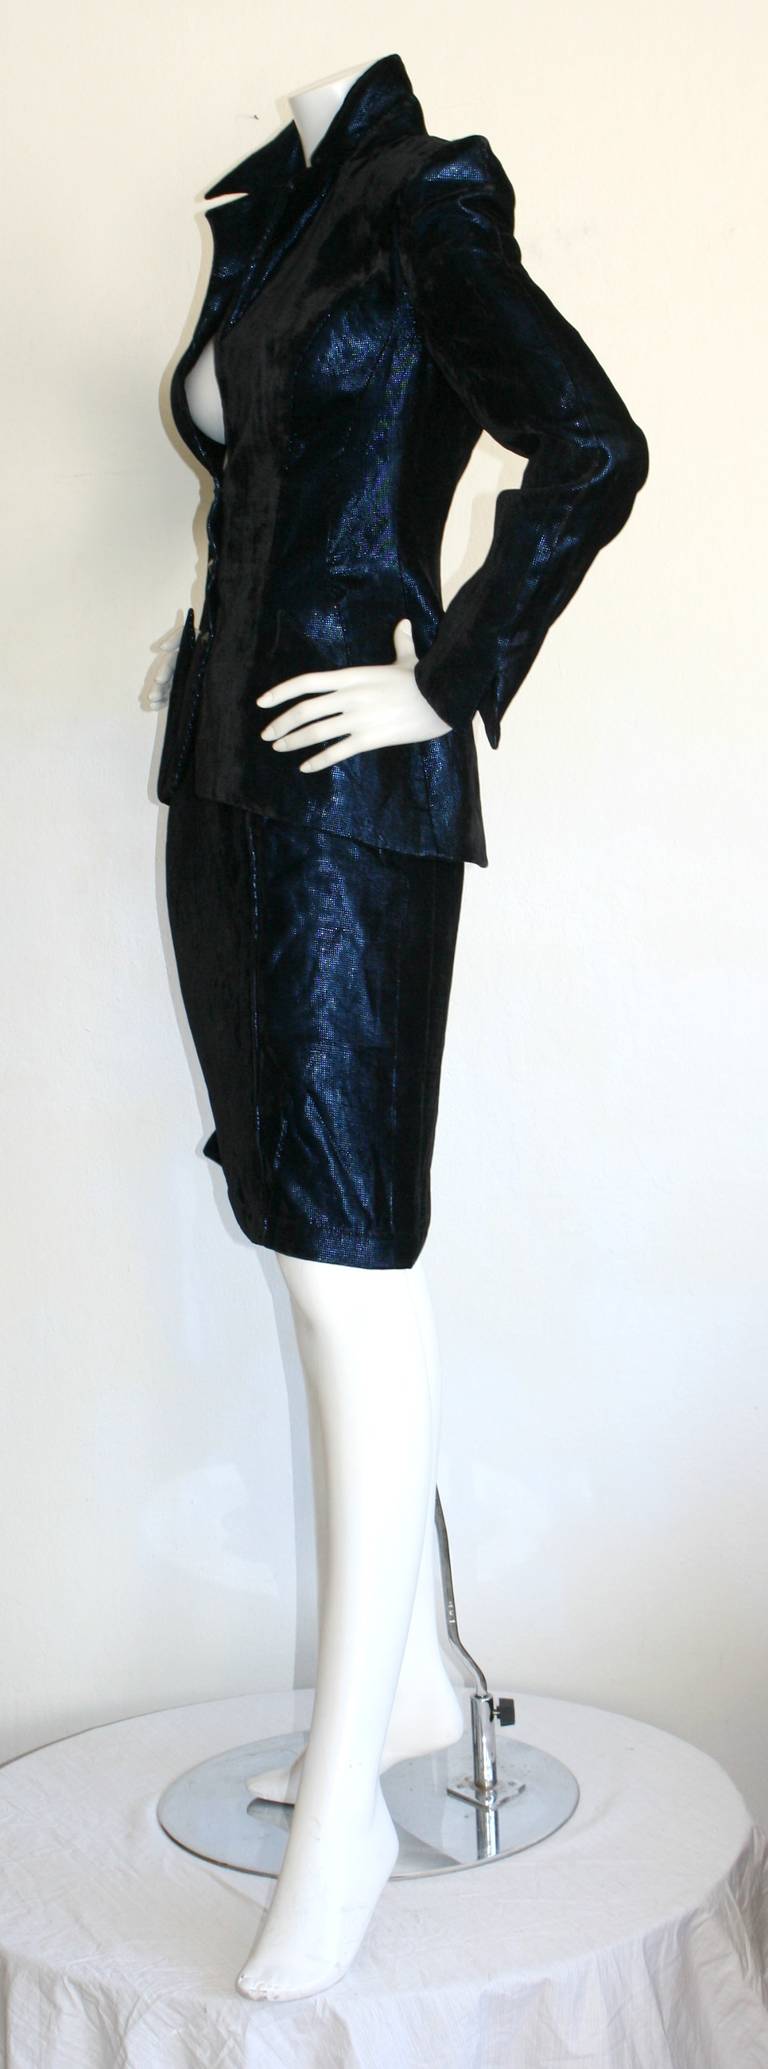 Wonderful vintage Thierry Mugler blue velvet metallic skirt suit! Signature Avant Garde lapels, pockets, waistband, etc. Features a high waist pencil skirt, and fitted blazer. Both worn great as separates, too. In great condition. Marked Size EU